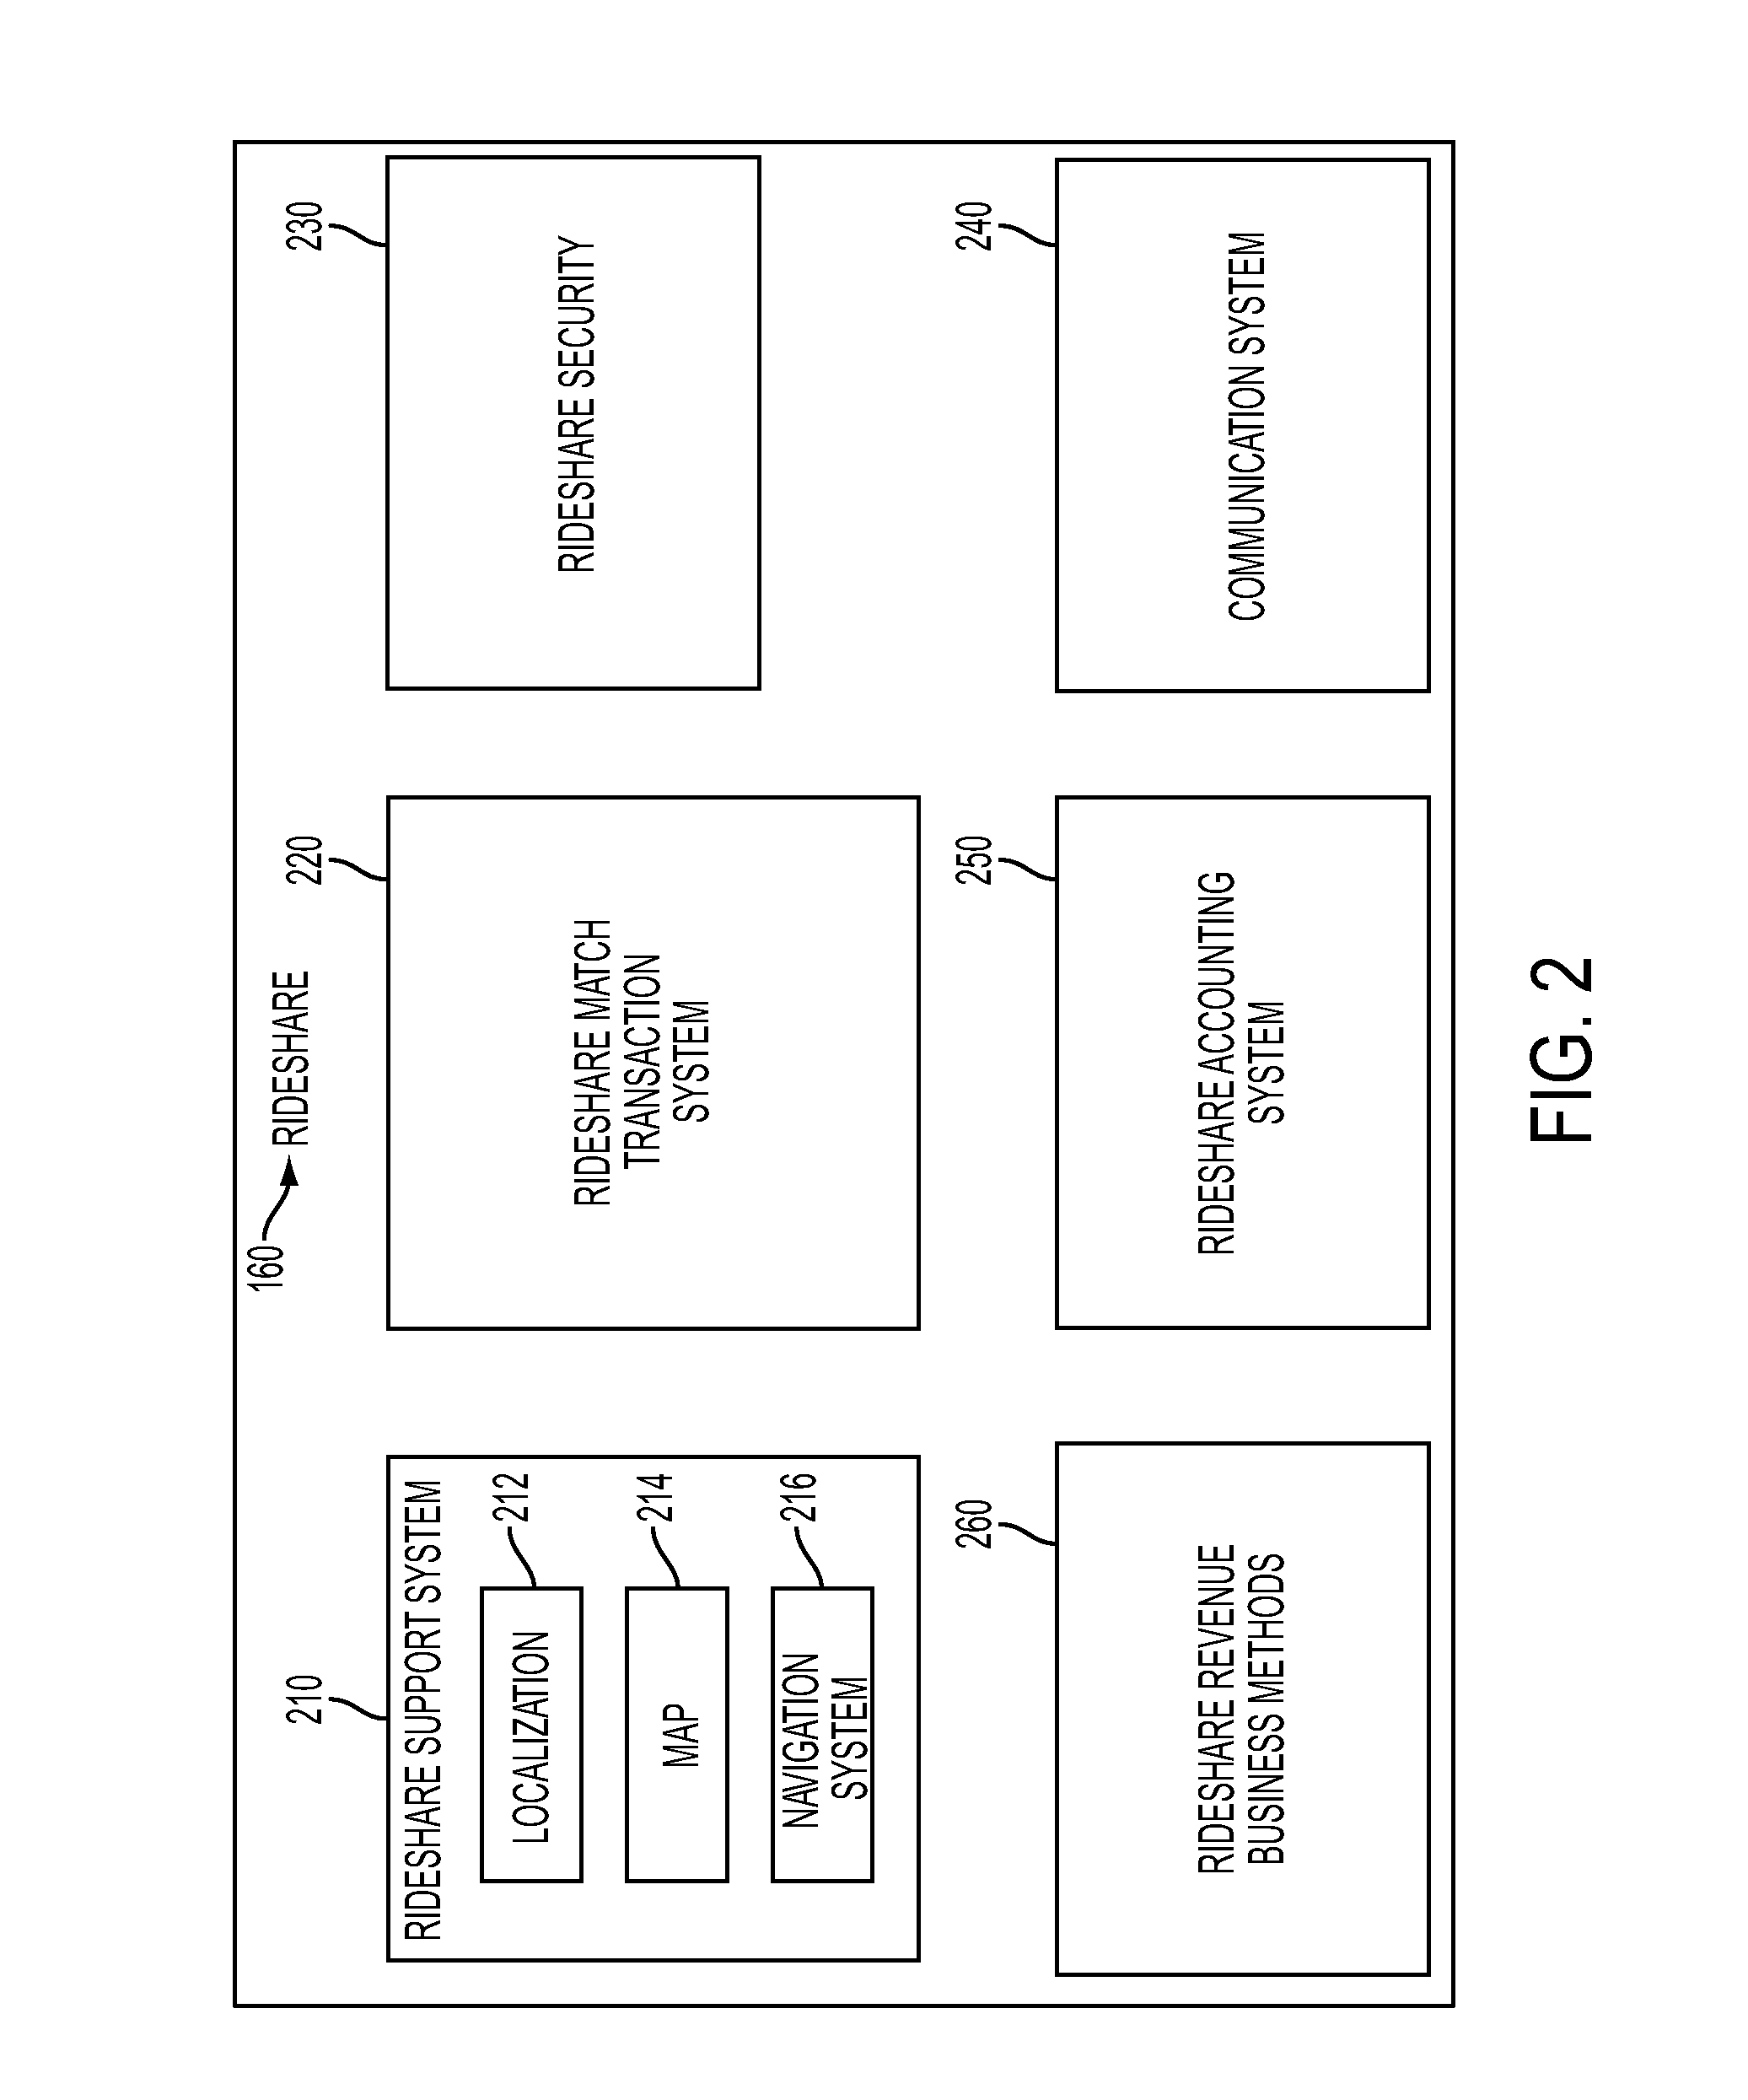 System and method for monitoring the security of participants in a rideshare environment